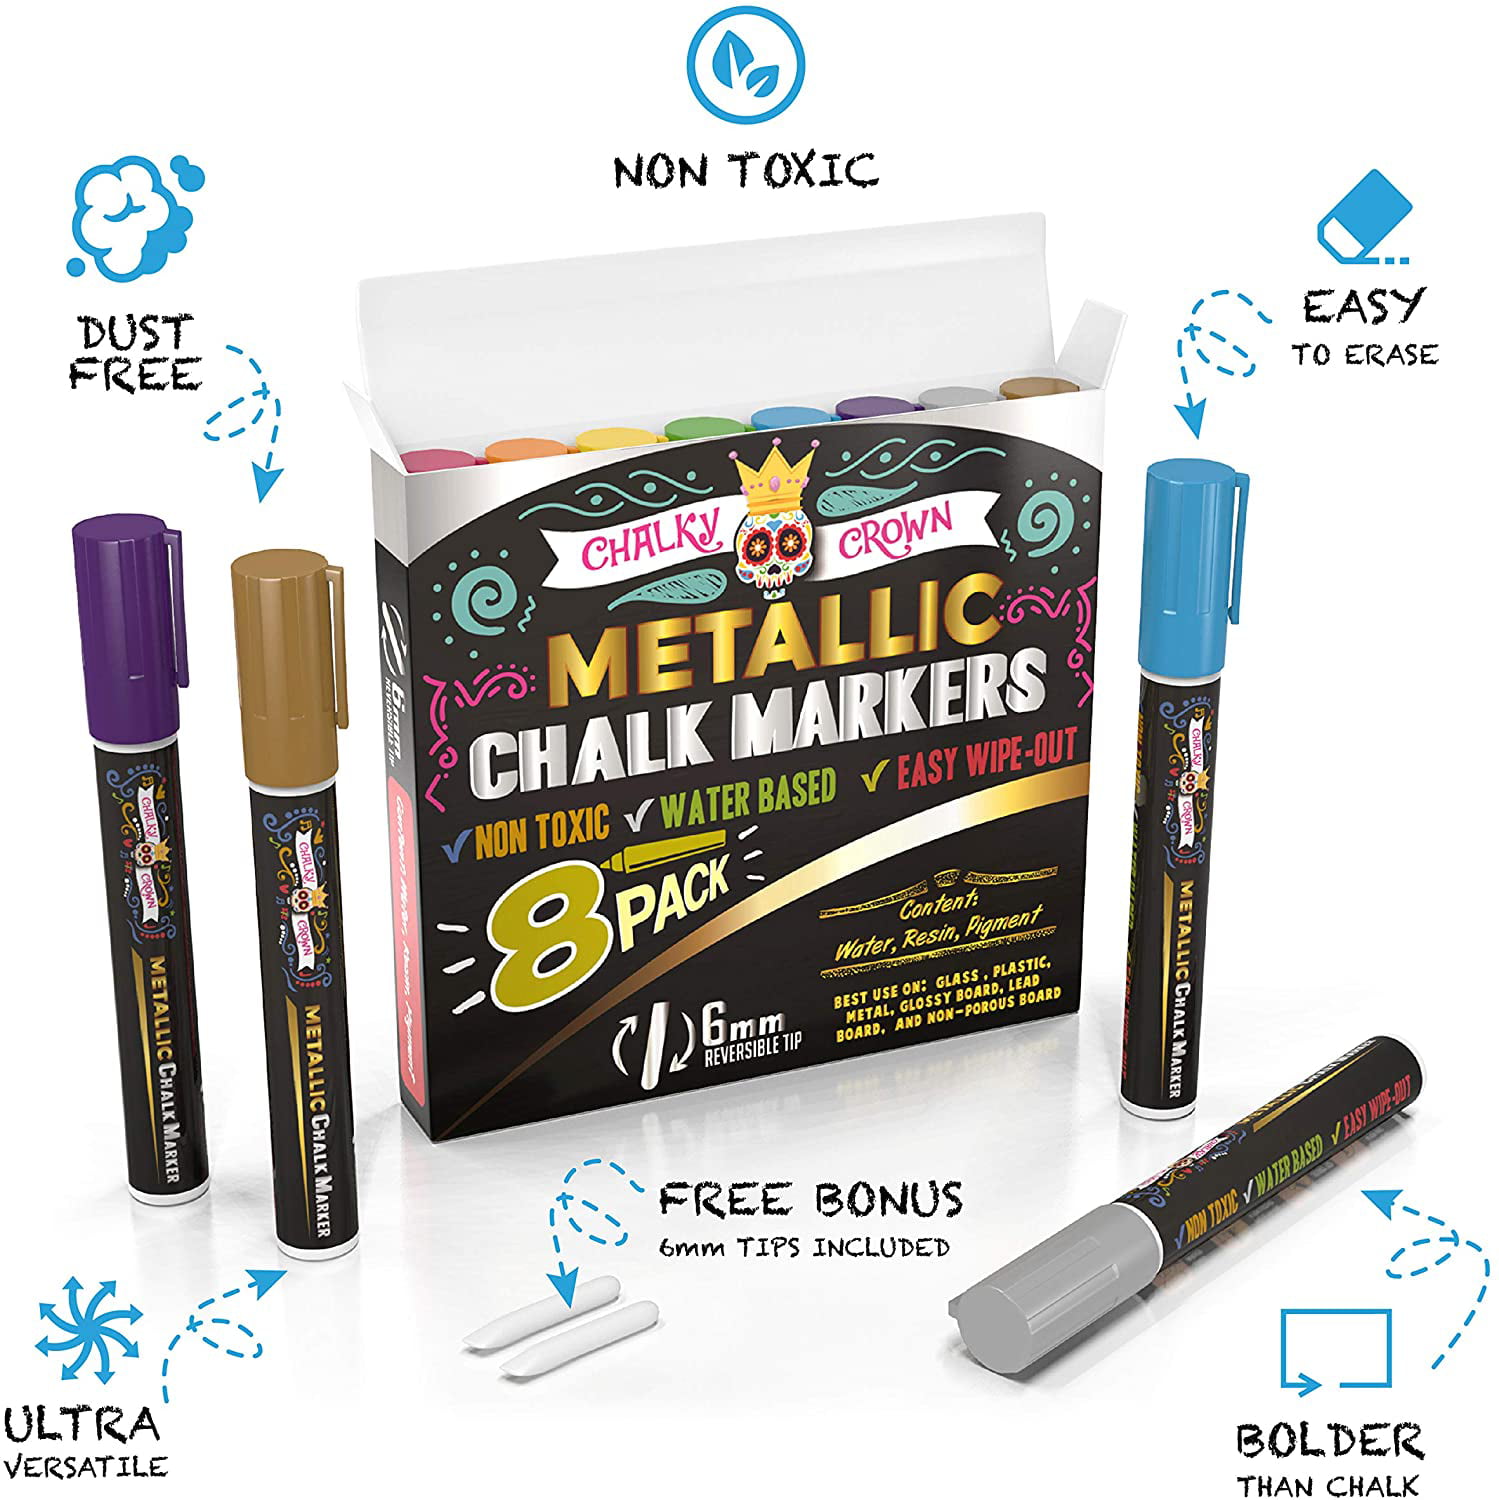 Chalky Crown Metallic Liquid Chalk Markers - Dry Erase Marker Pens - Chalk  Markers for Chalkboards, Signs, Windows - Reversible Tip (8 Pack) - 24  Labels Included 